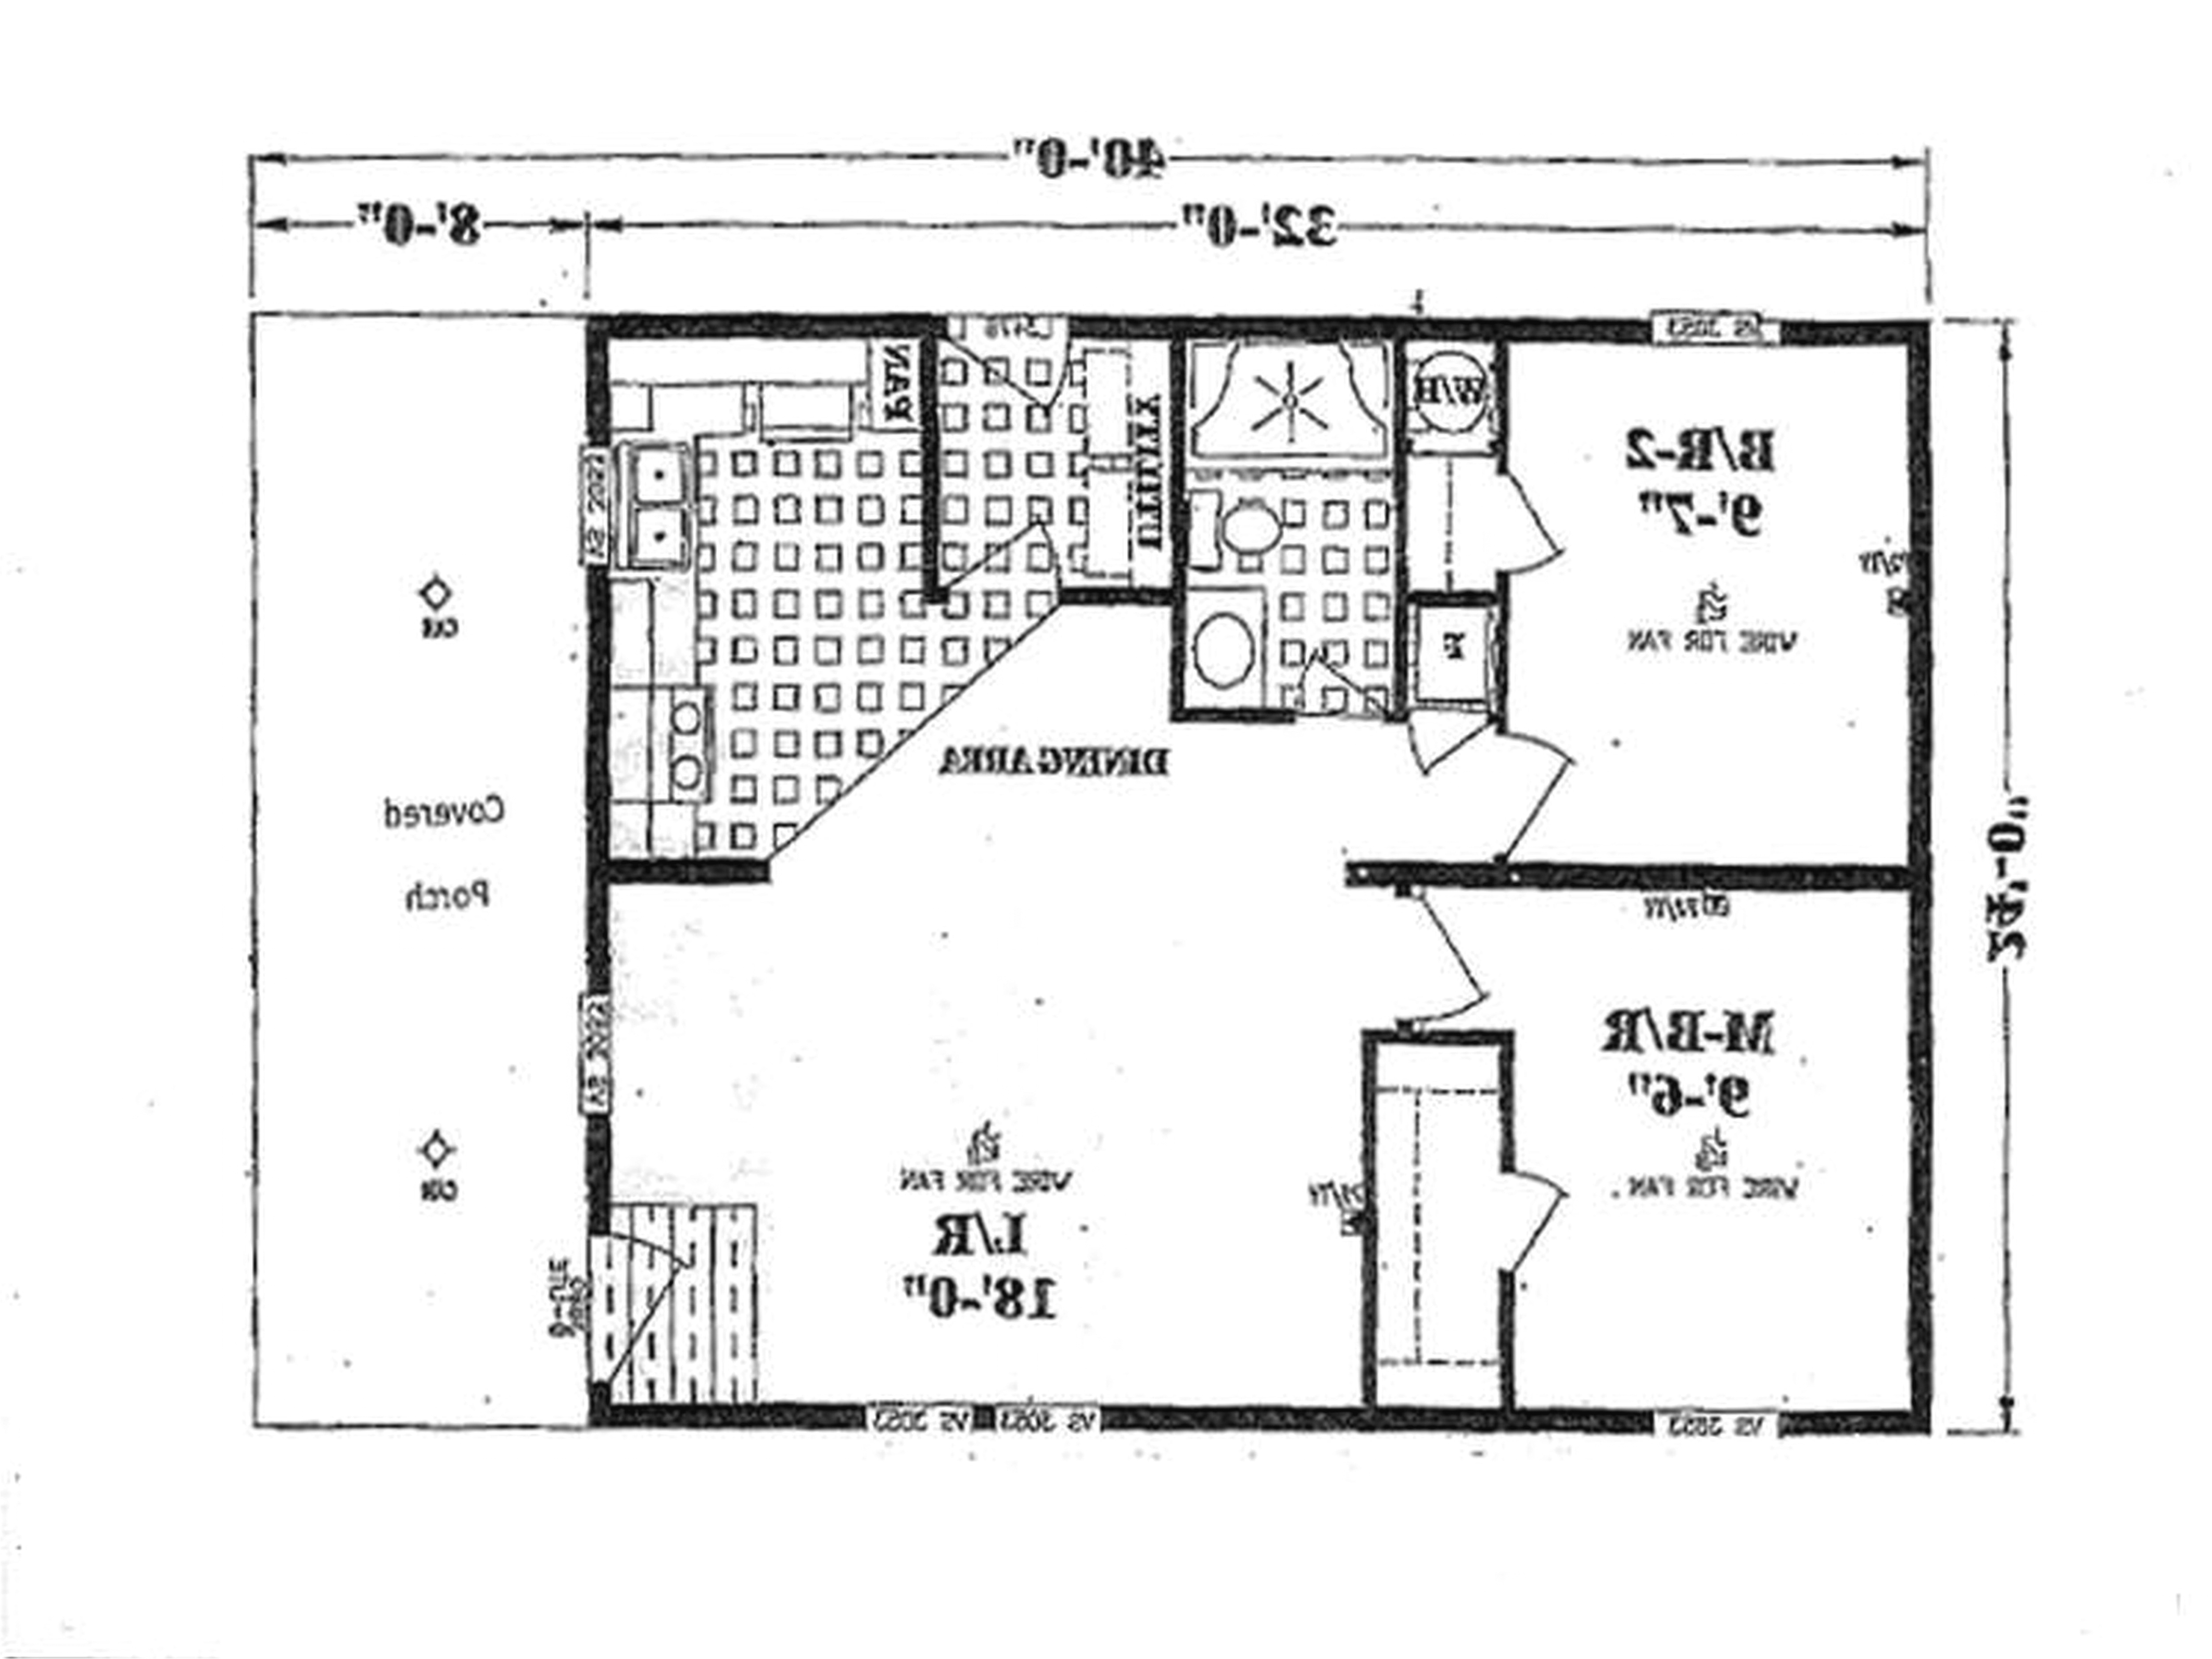 small home floor plans under 1000 sq ft house plans under 1000 sq feet 69 1200 sq ft basement plans 1200 sq